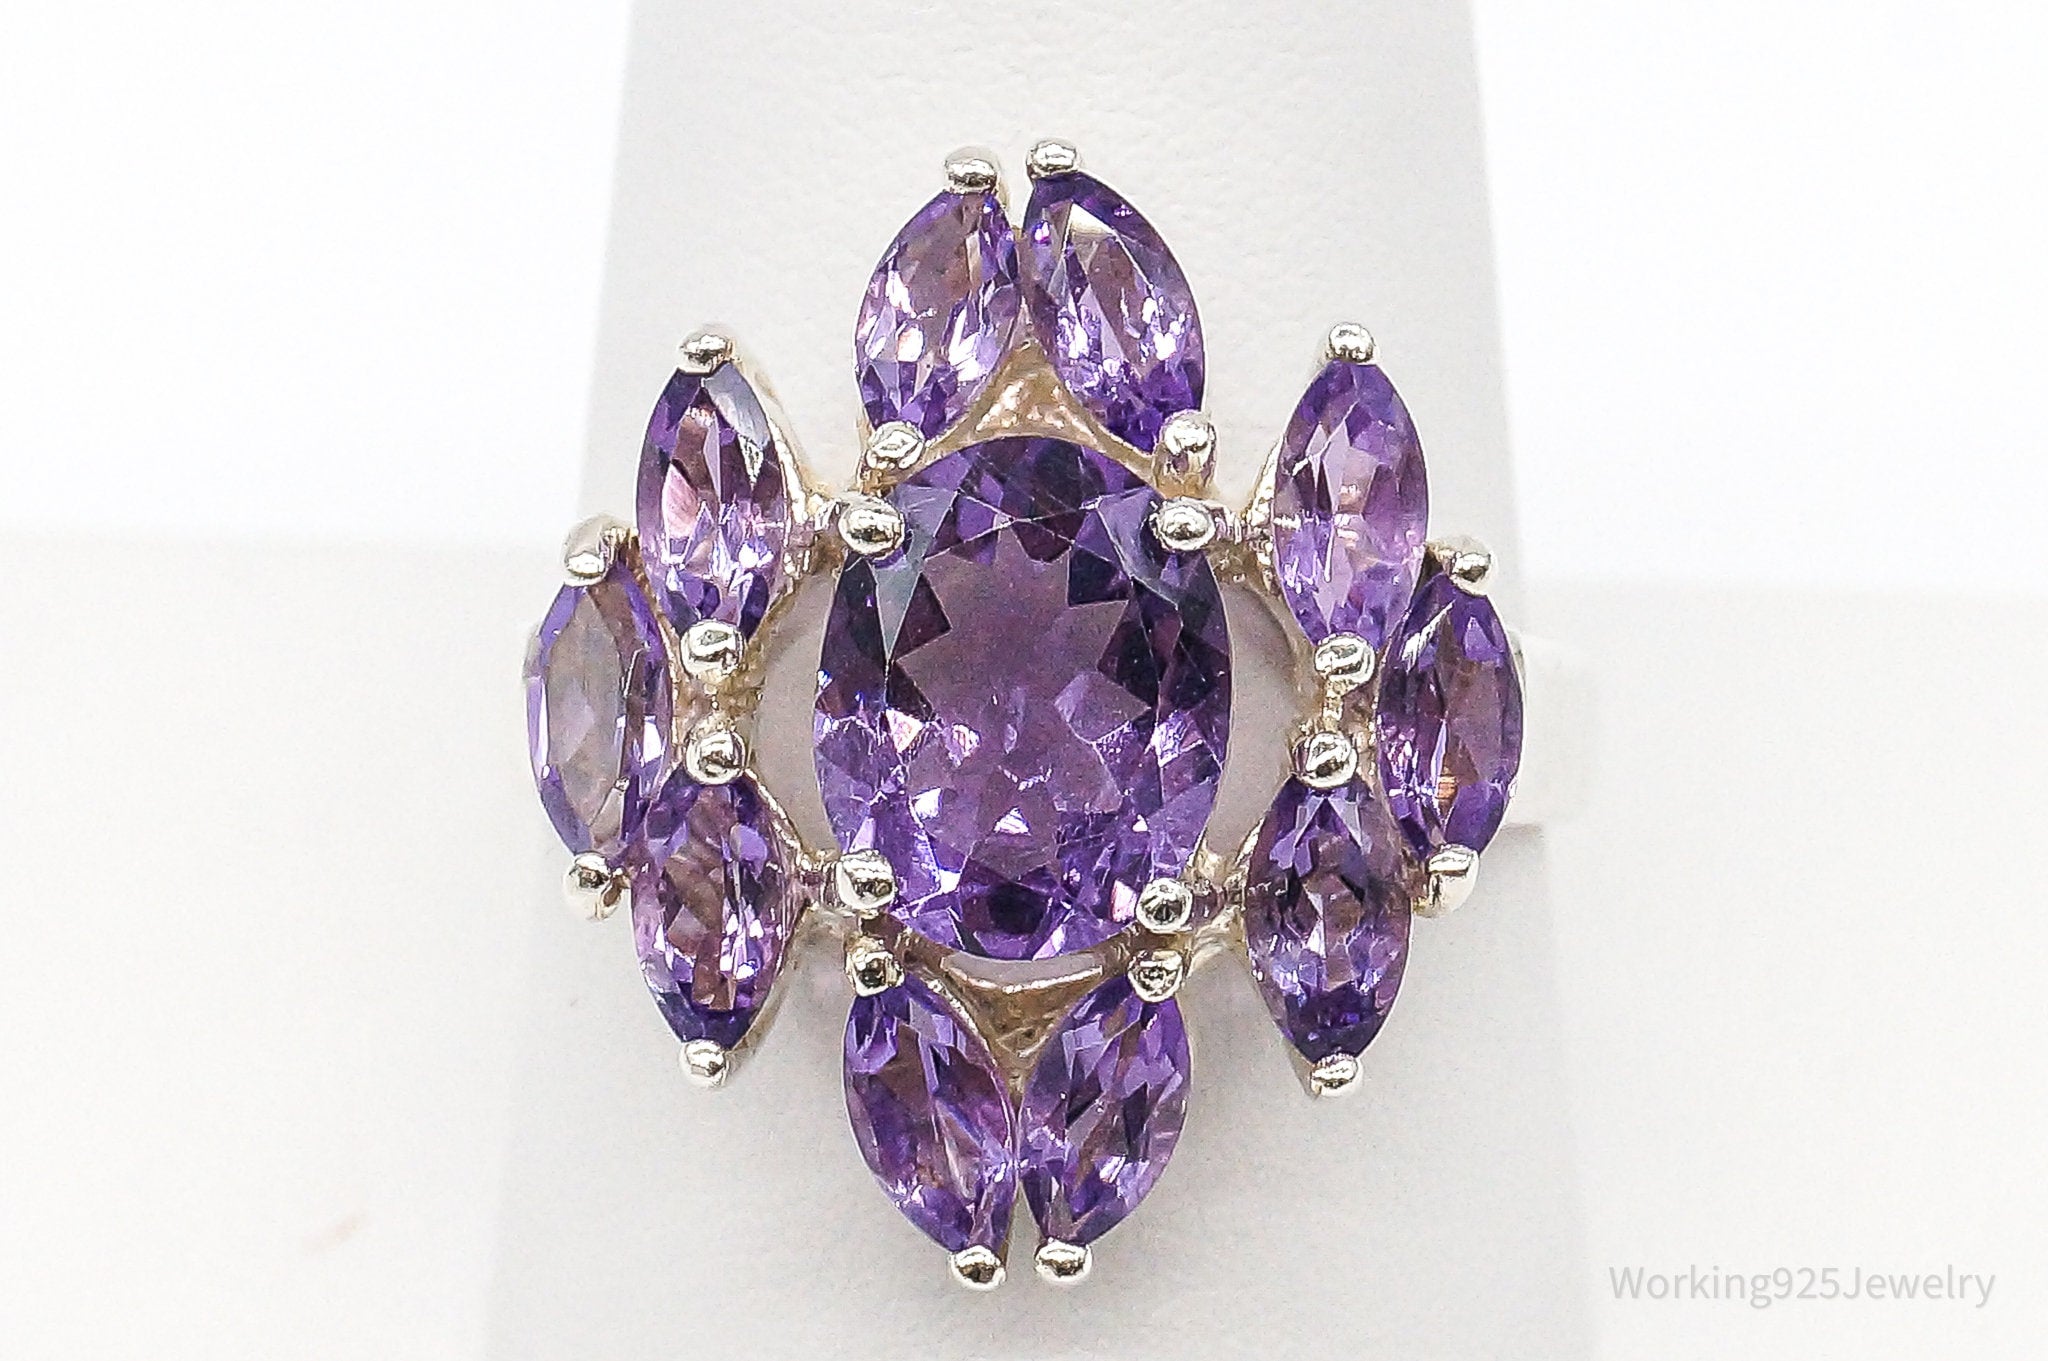 Large Amethyst Sterling Silver Ring - Size 9.75